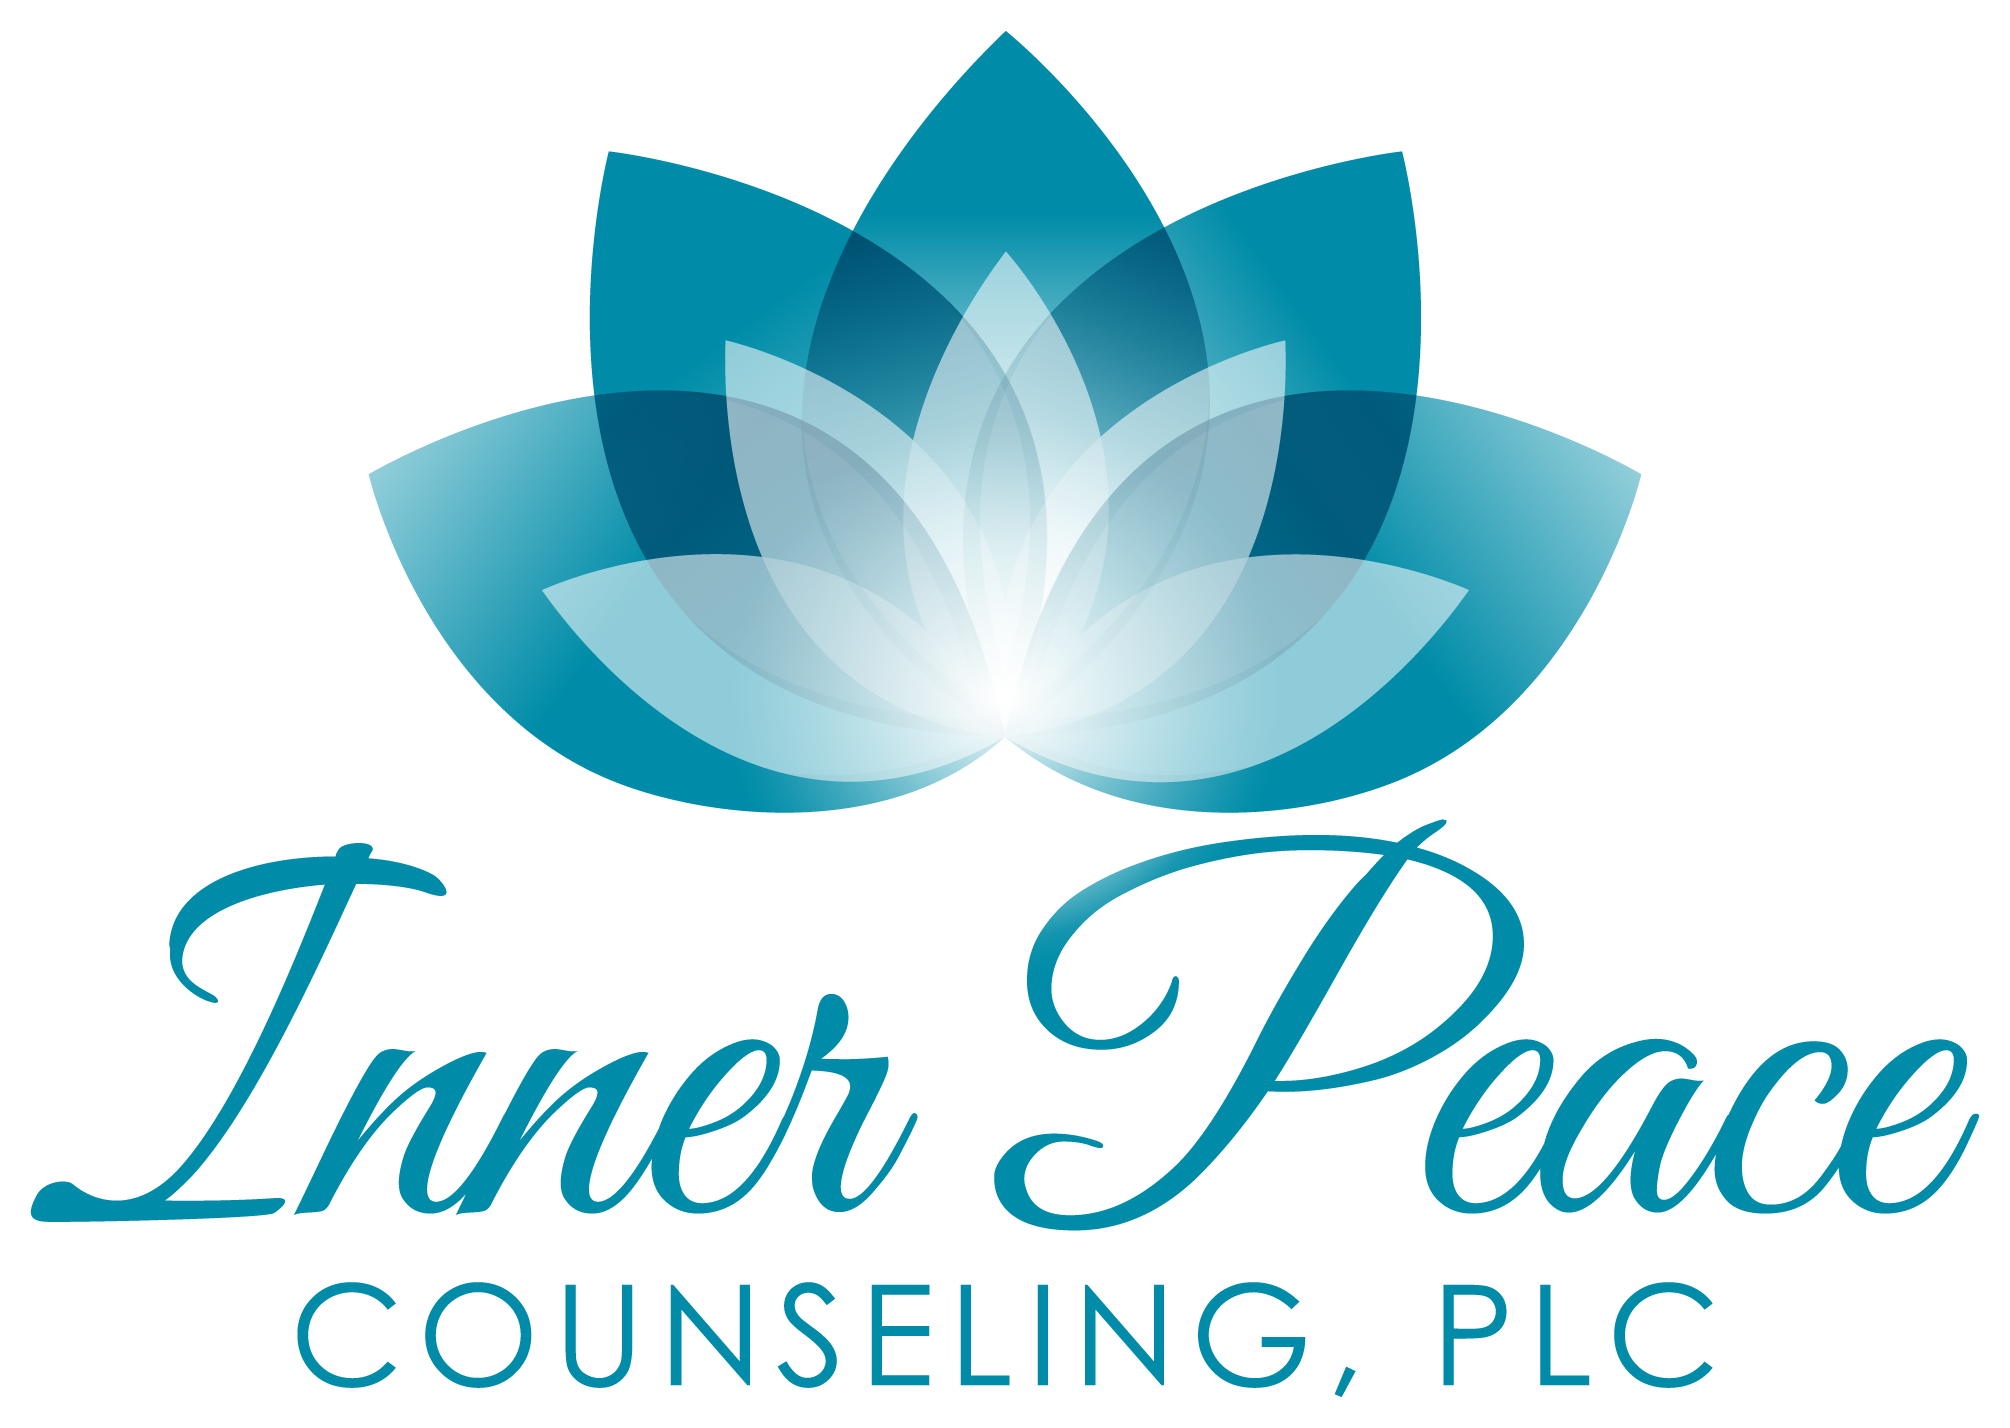 Offering individual therapy, couples counseling, family therapy, and life coaching in Kalamazoo and throughout Michigan.